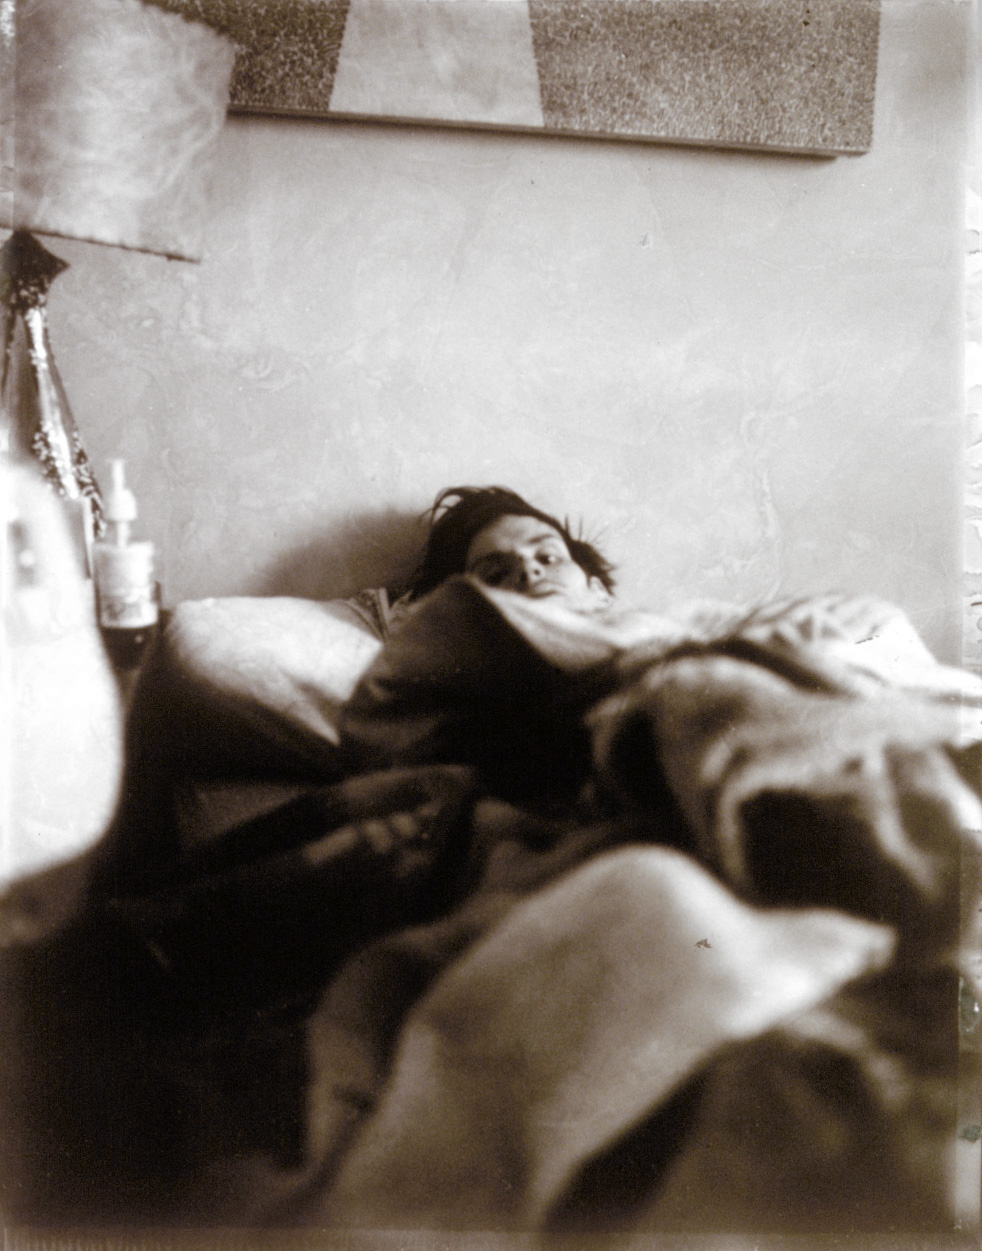 A tinted photograph of the artist Mark Morrisroe, a light-skinned man with dark hair, lying in bed, taken from near the foot of the bed, with just his face peering over thick blankets that obscure his body.